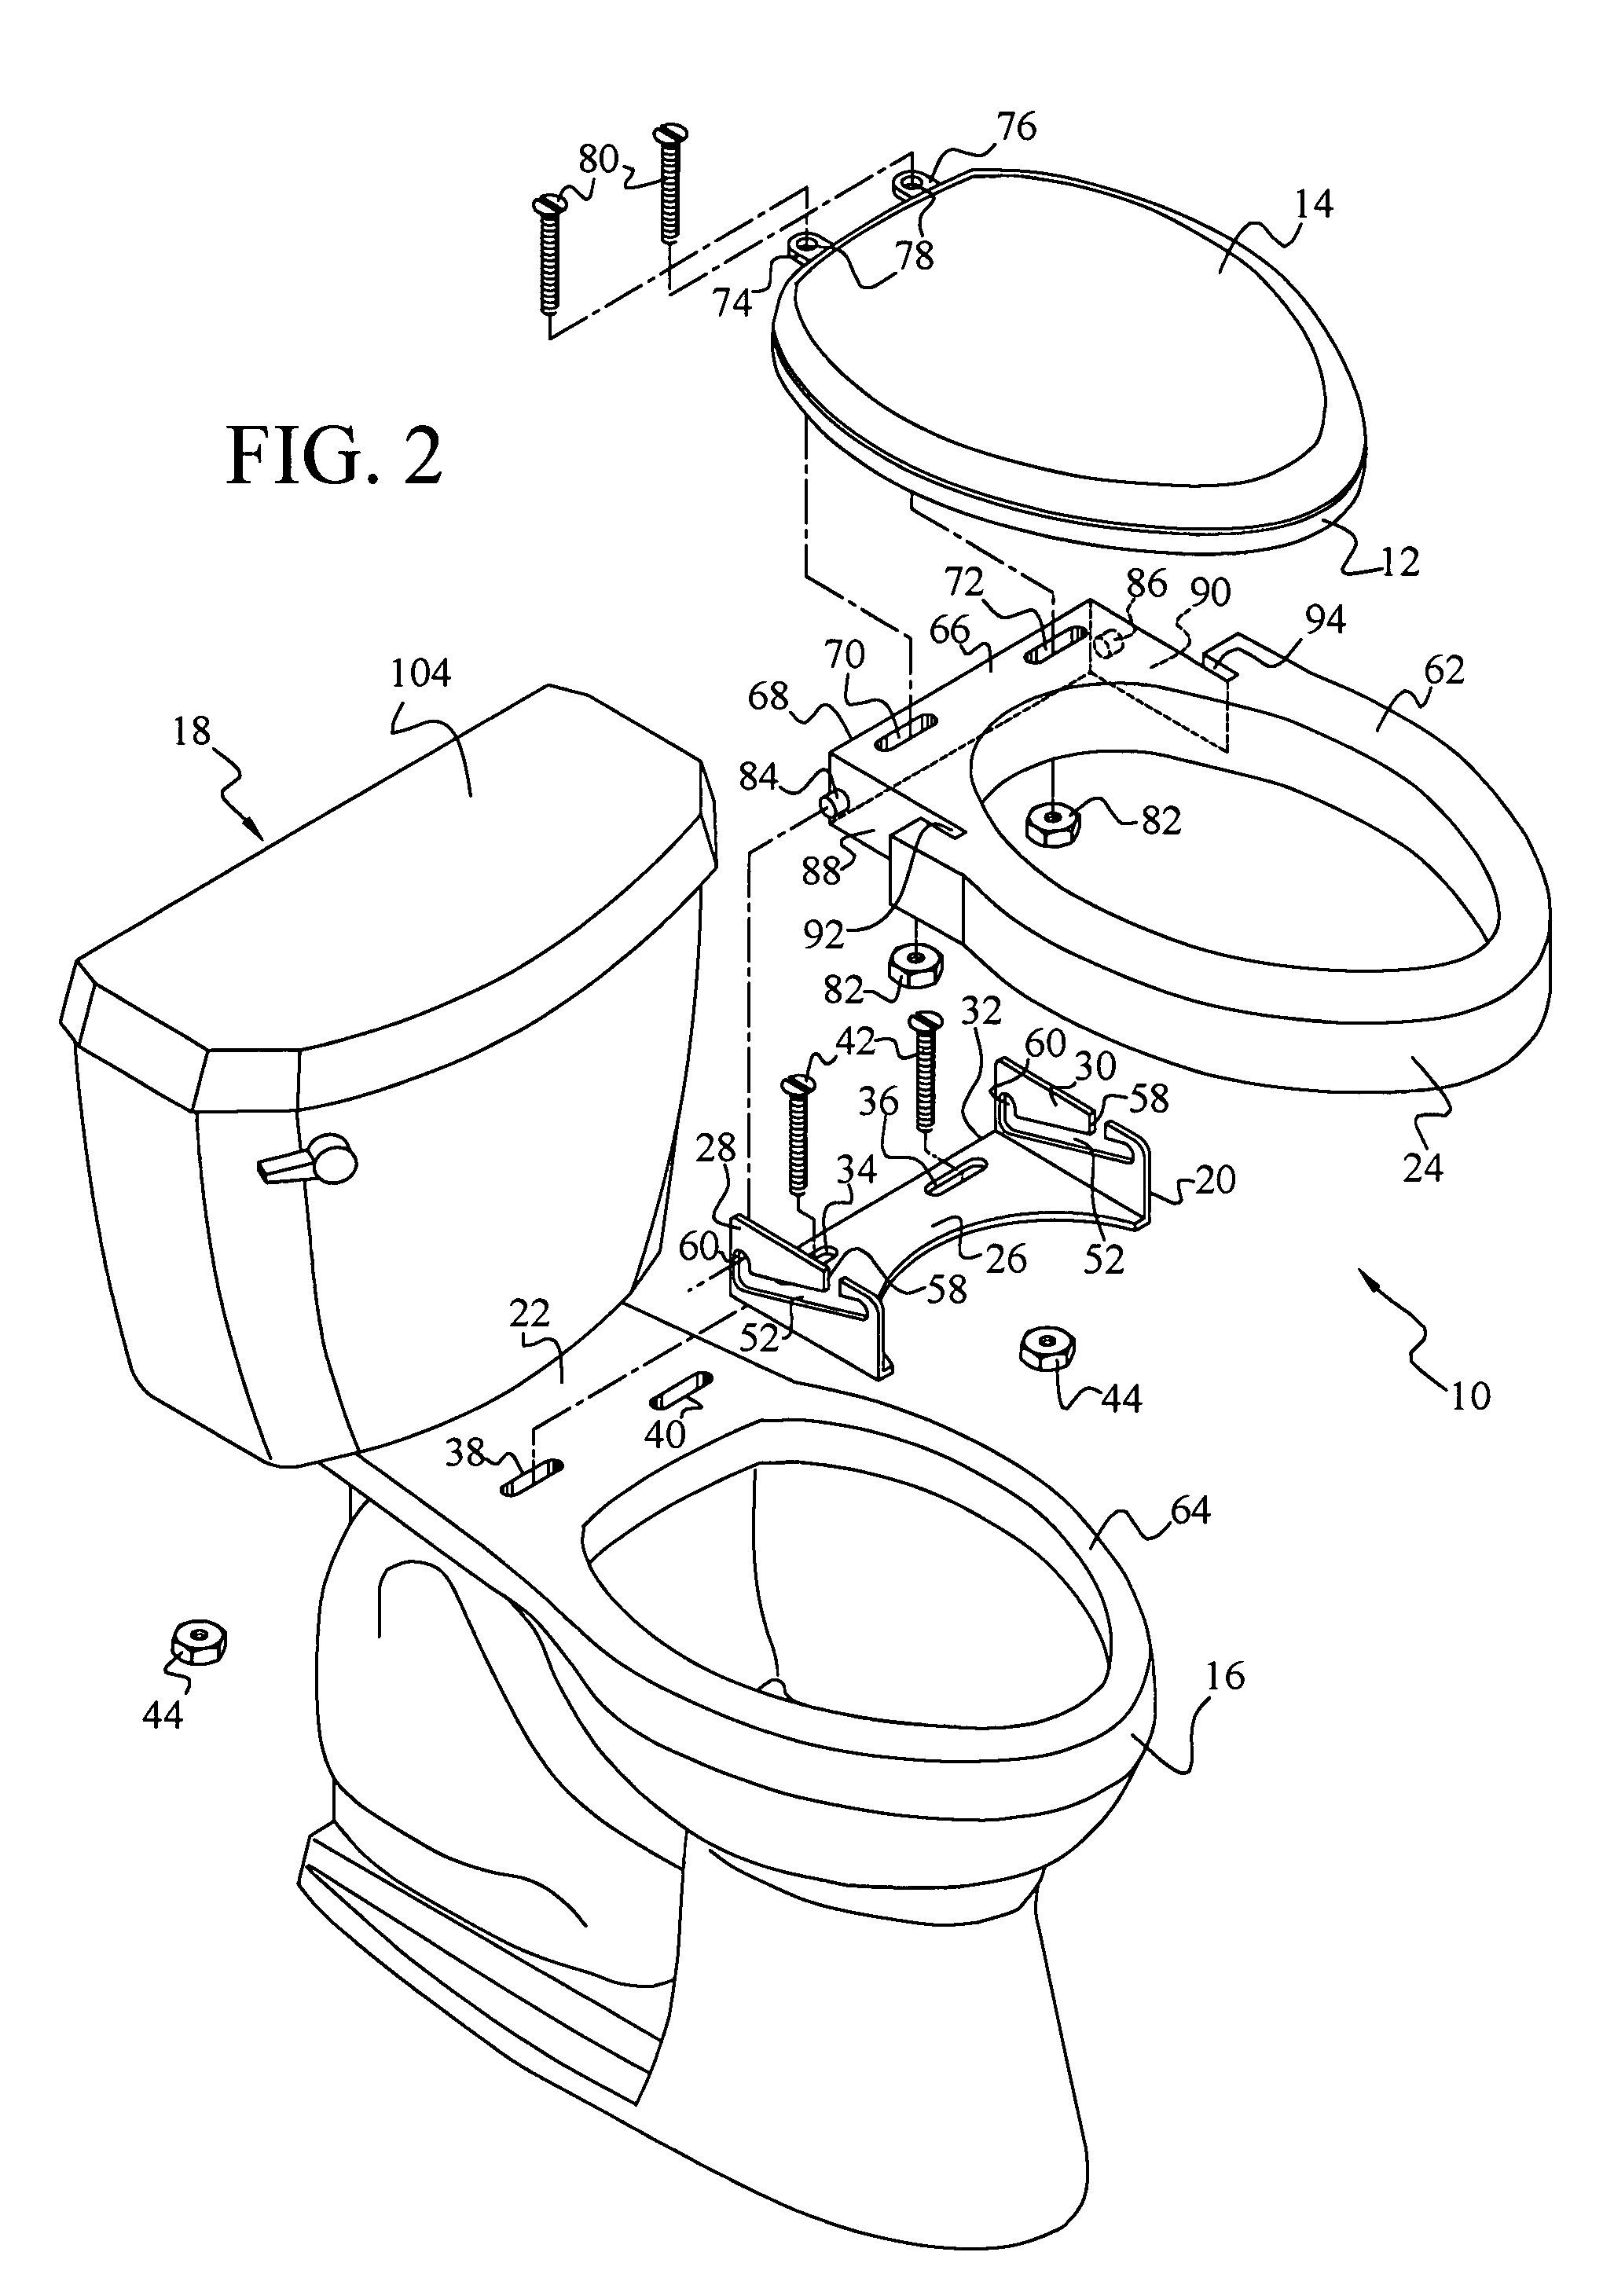 Toilet seat elevator assembly